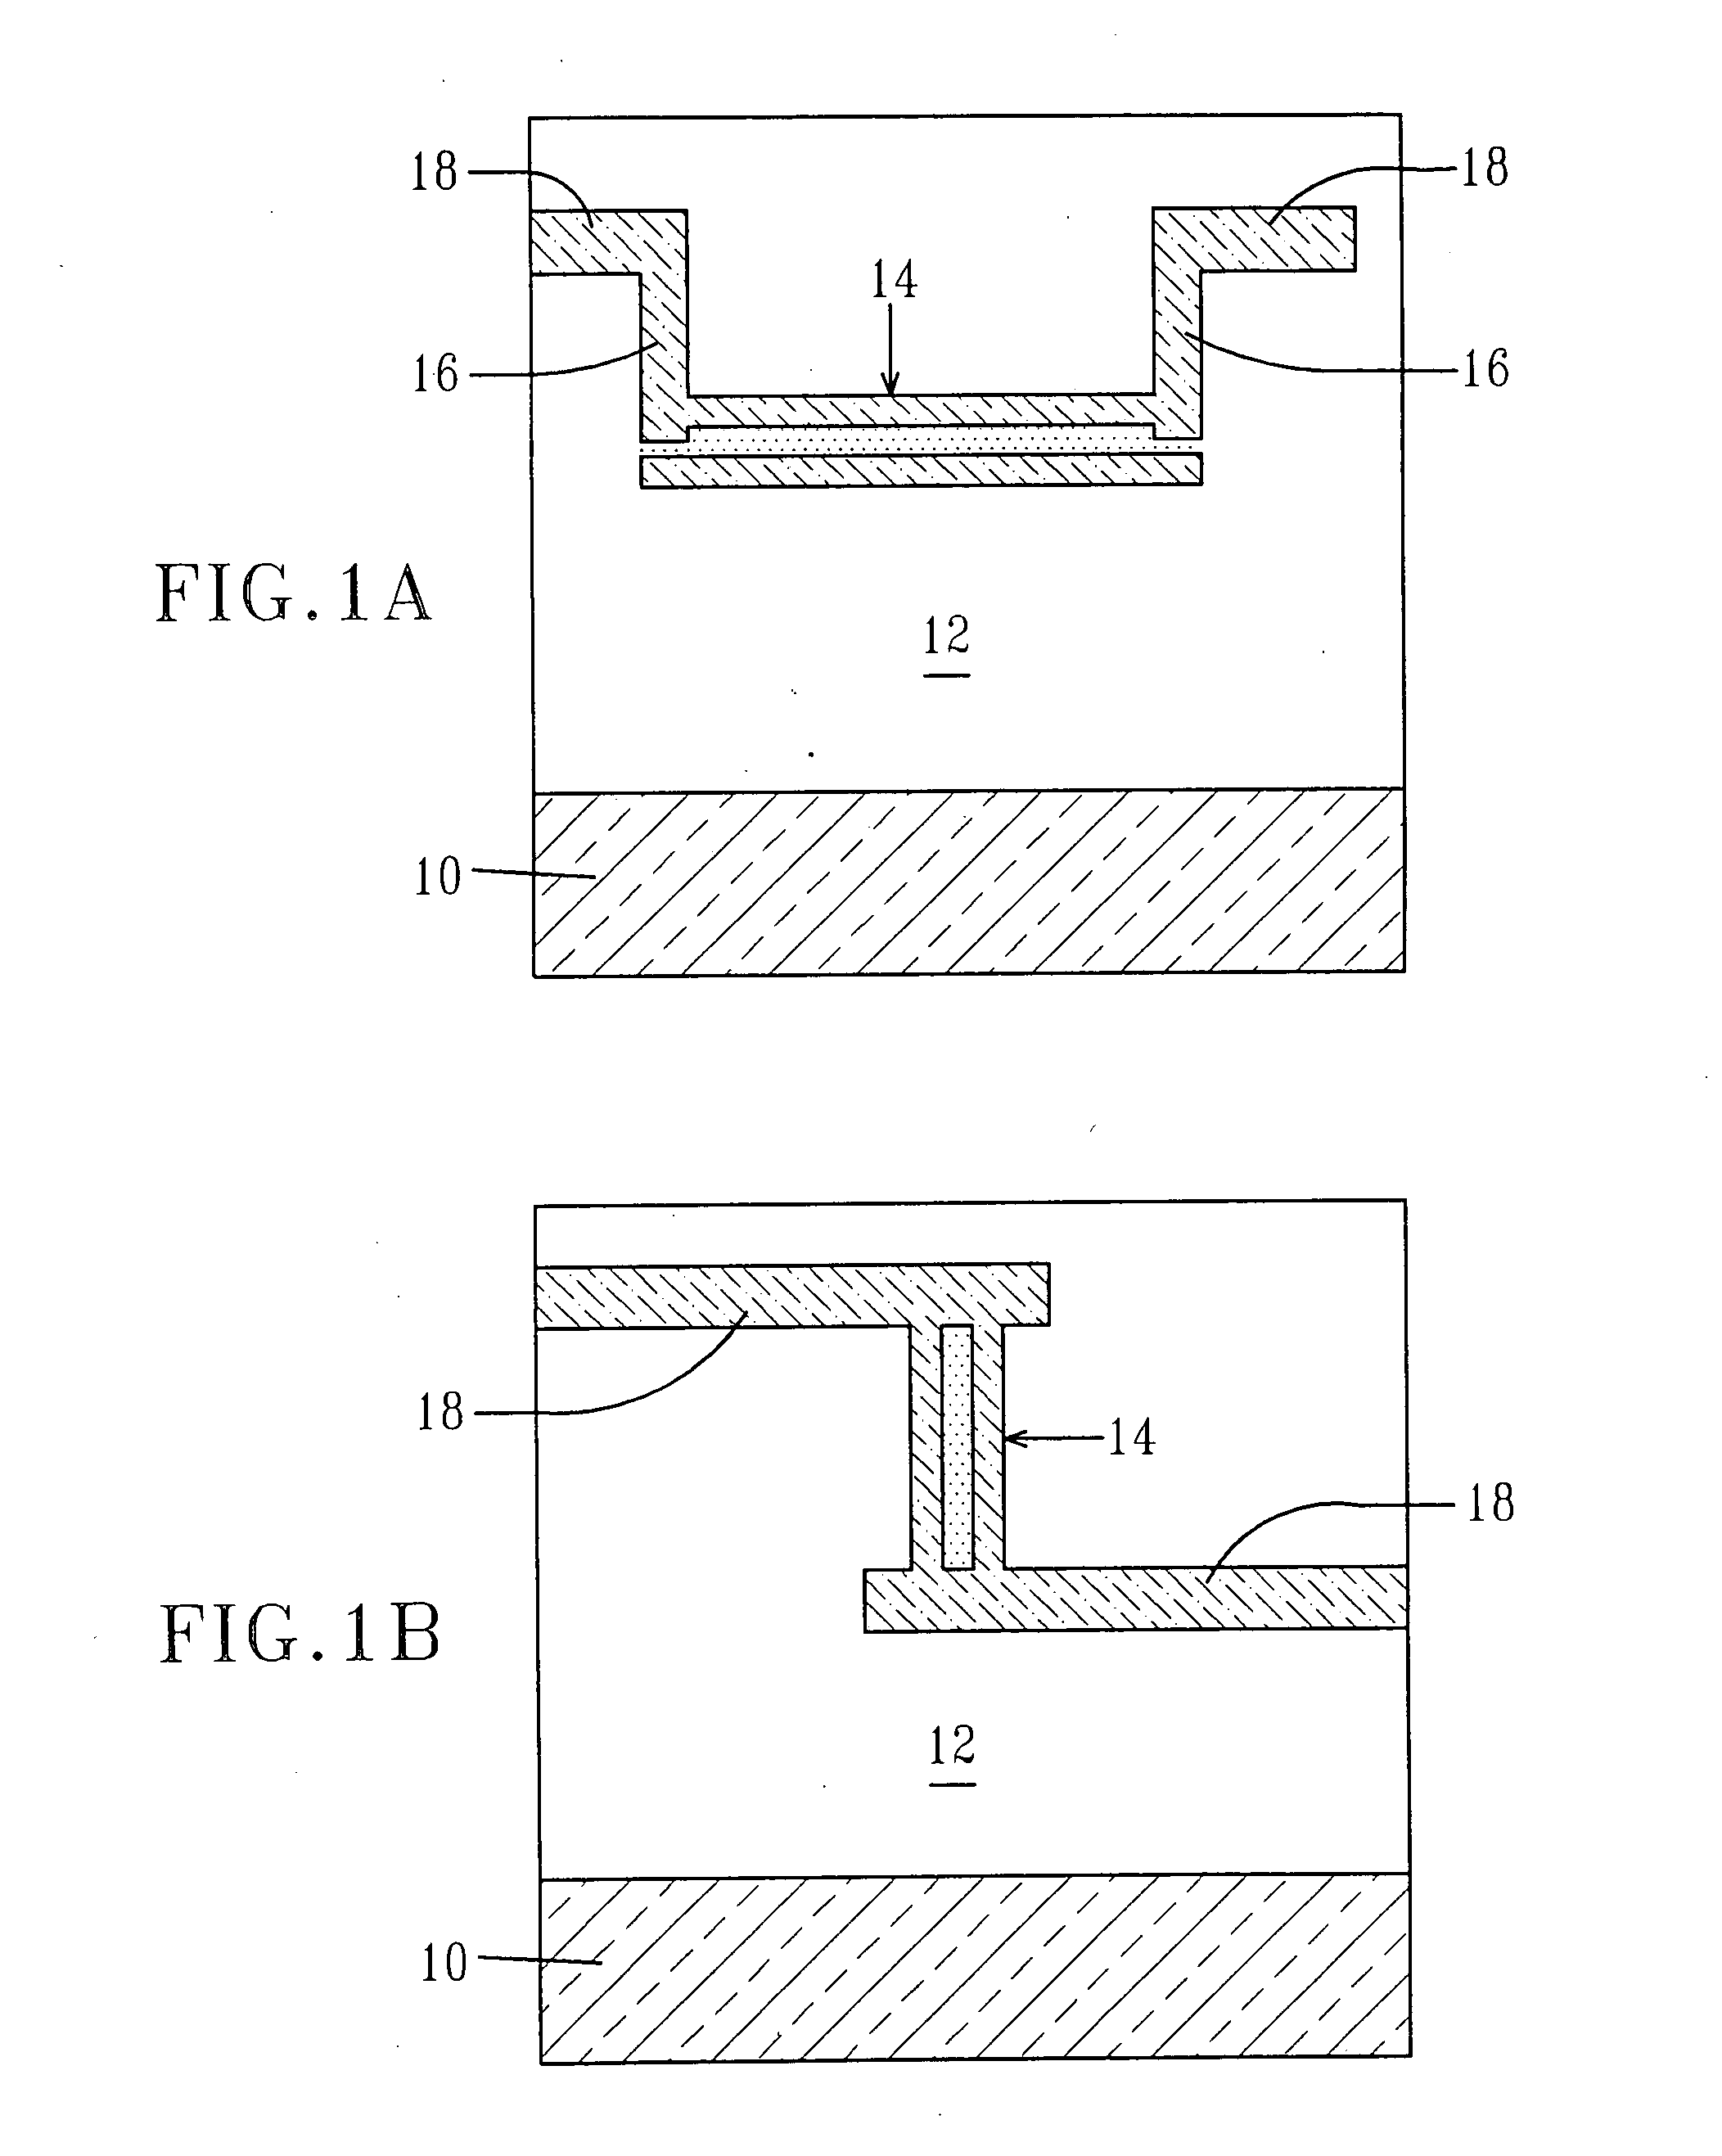 PHASE-CHANGE TaN RESISTOR BASED TRIPLE-STATE/MULTI-STATE READ ONLY MEMORY